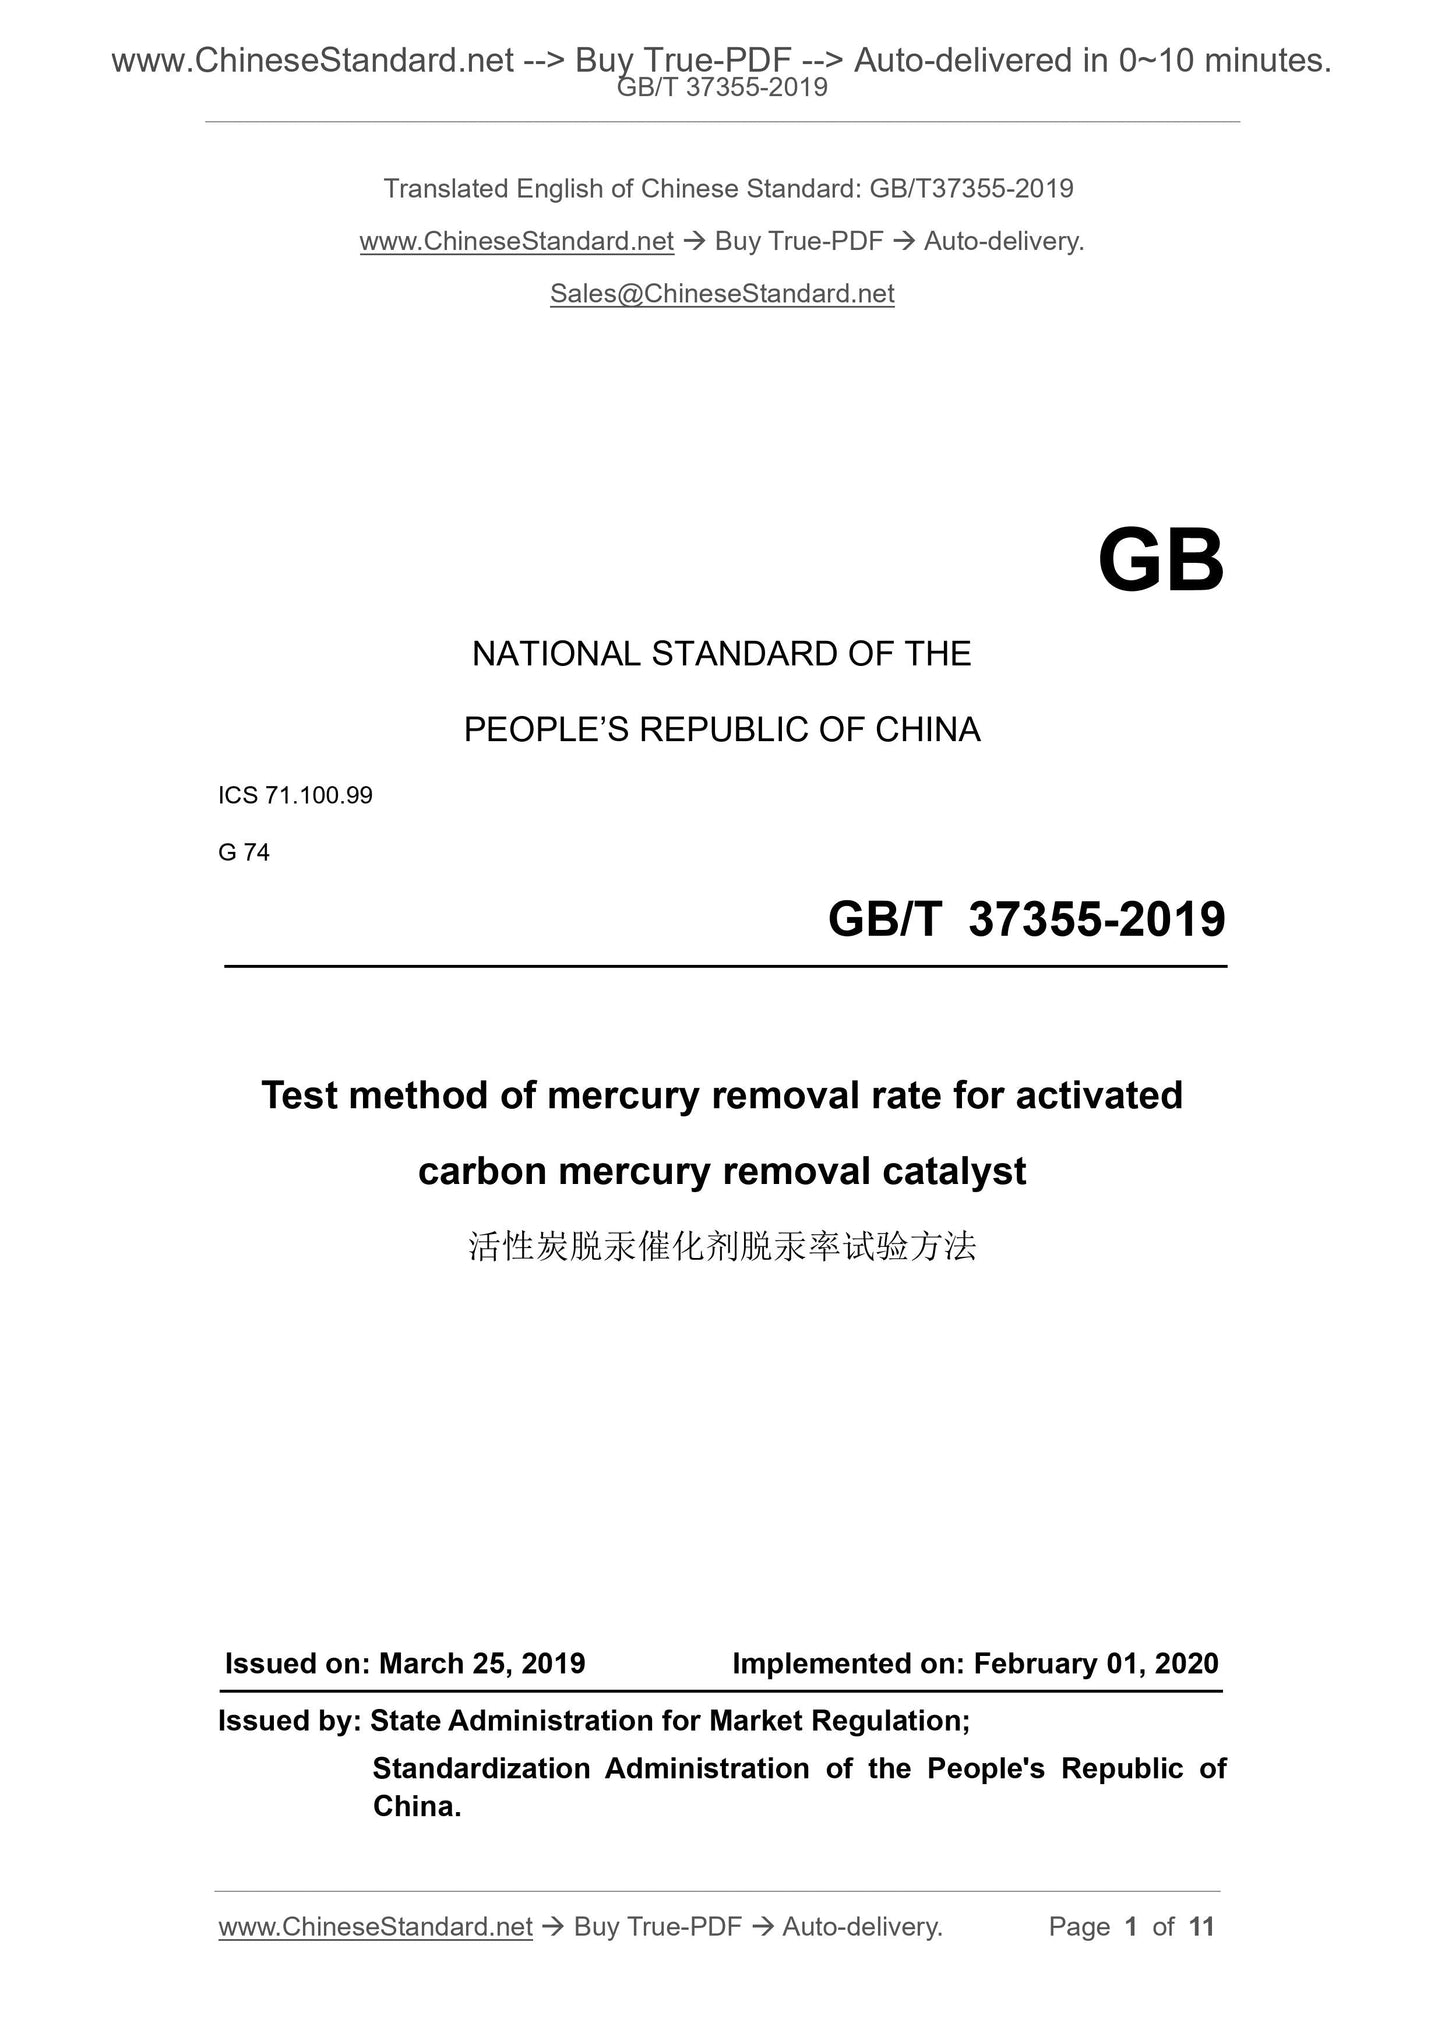 GB/T 37355-2019 Page 1